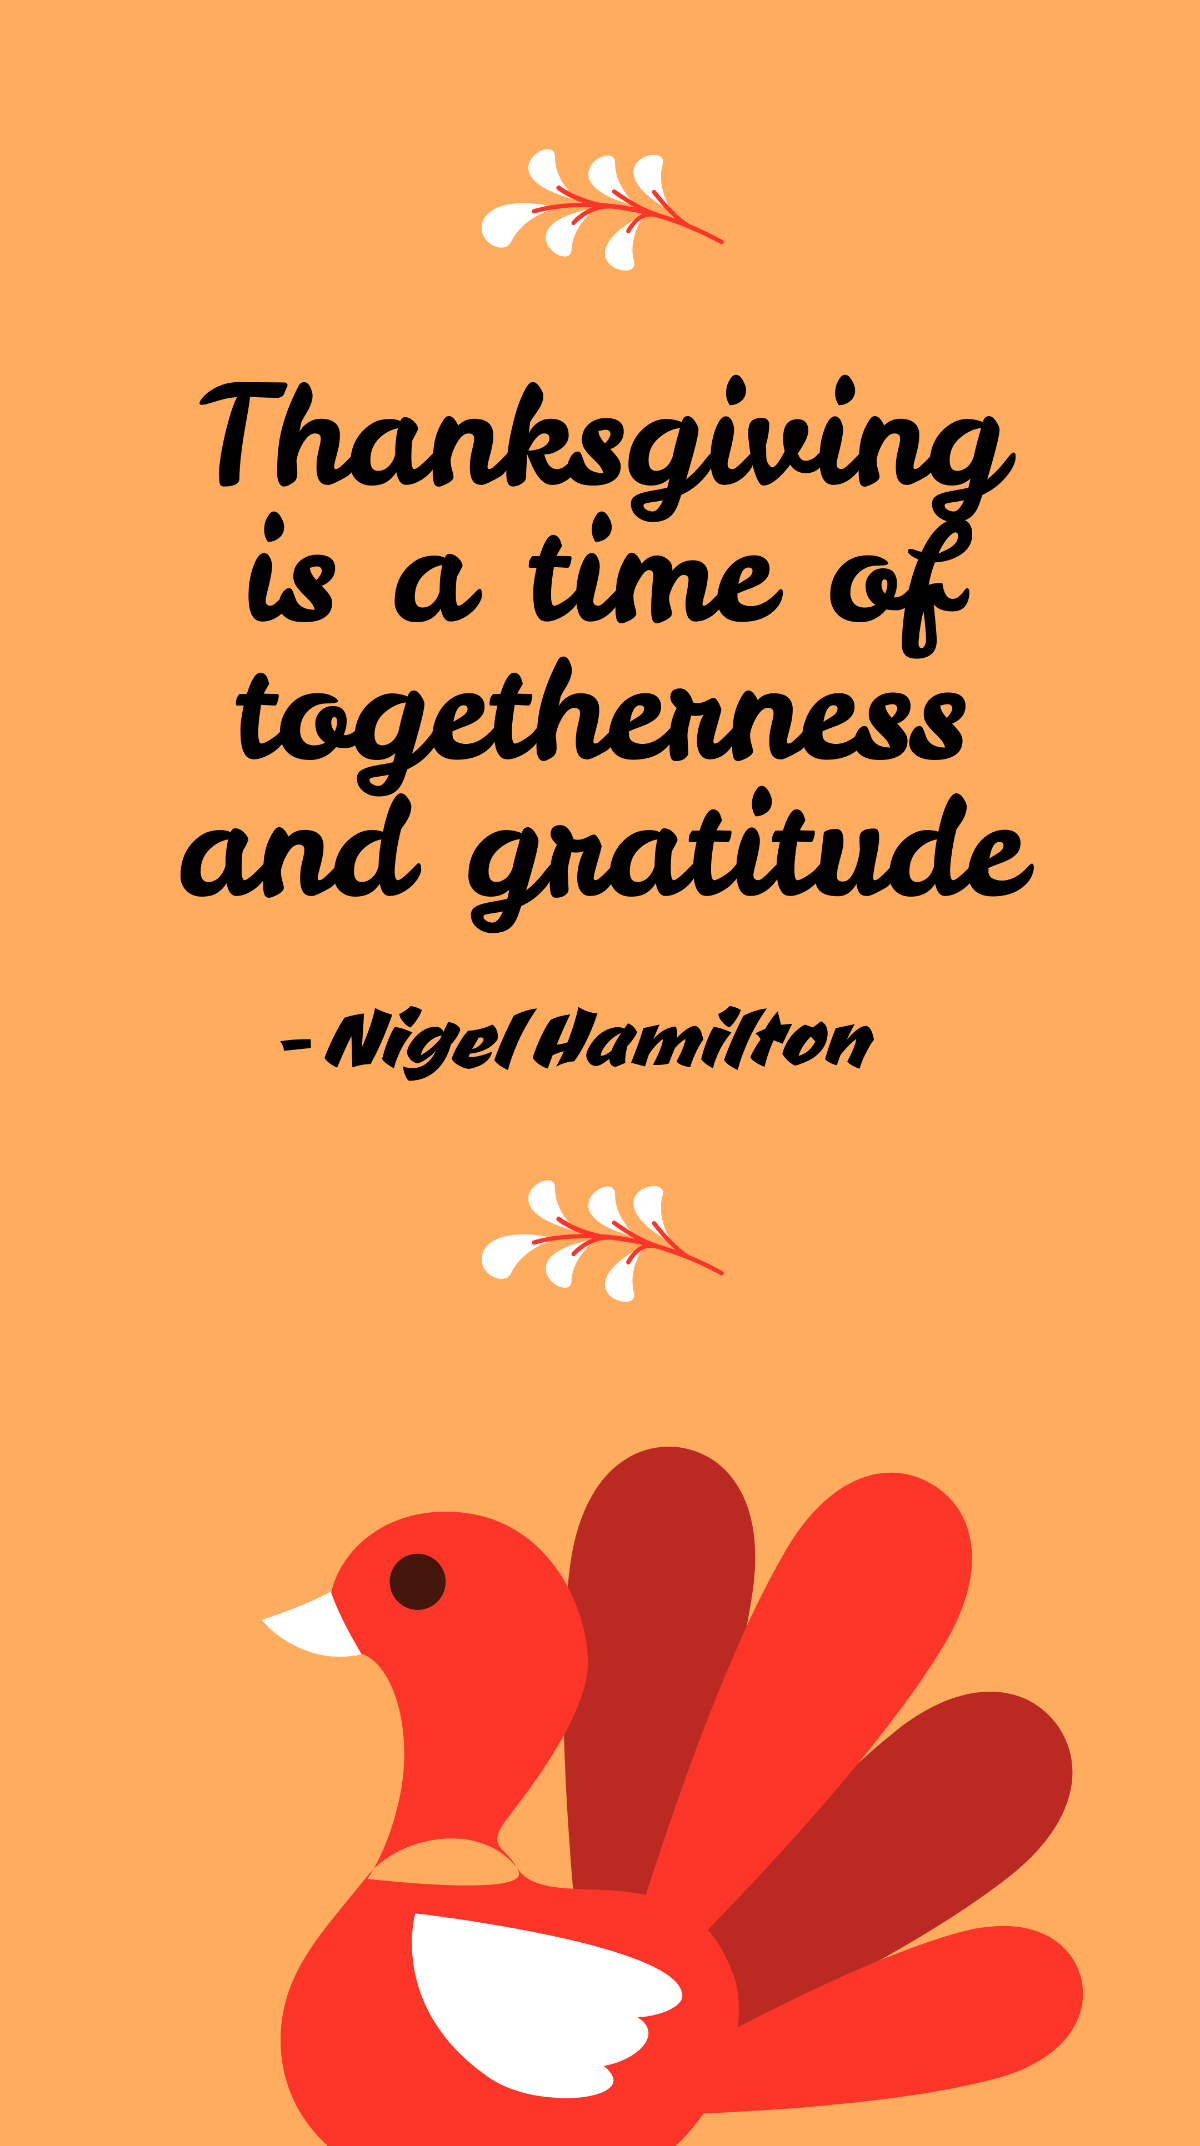 Nigel Hamilton - Thanksgiving is a time of togetherness and gratitude Template